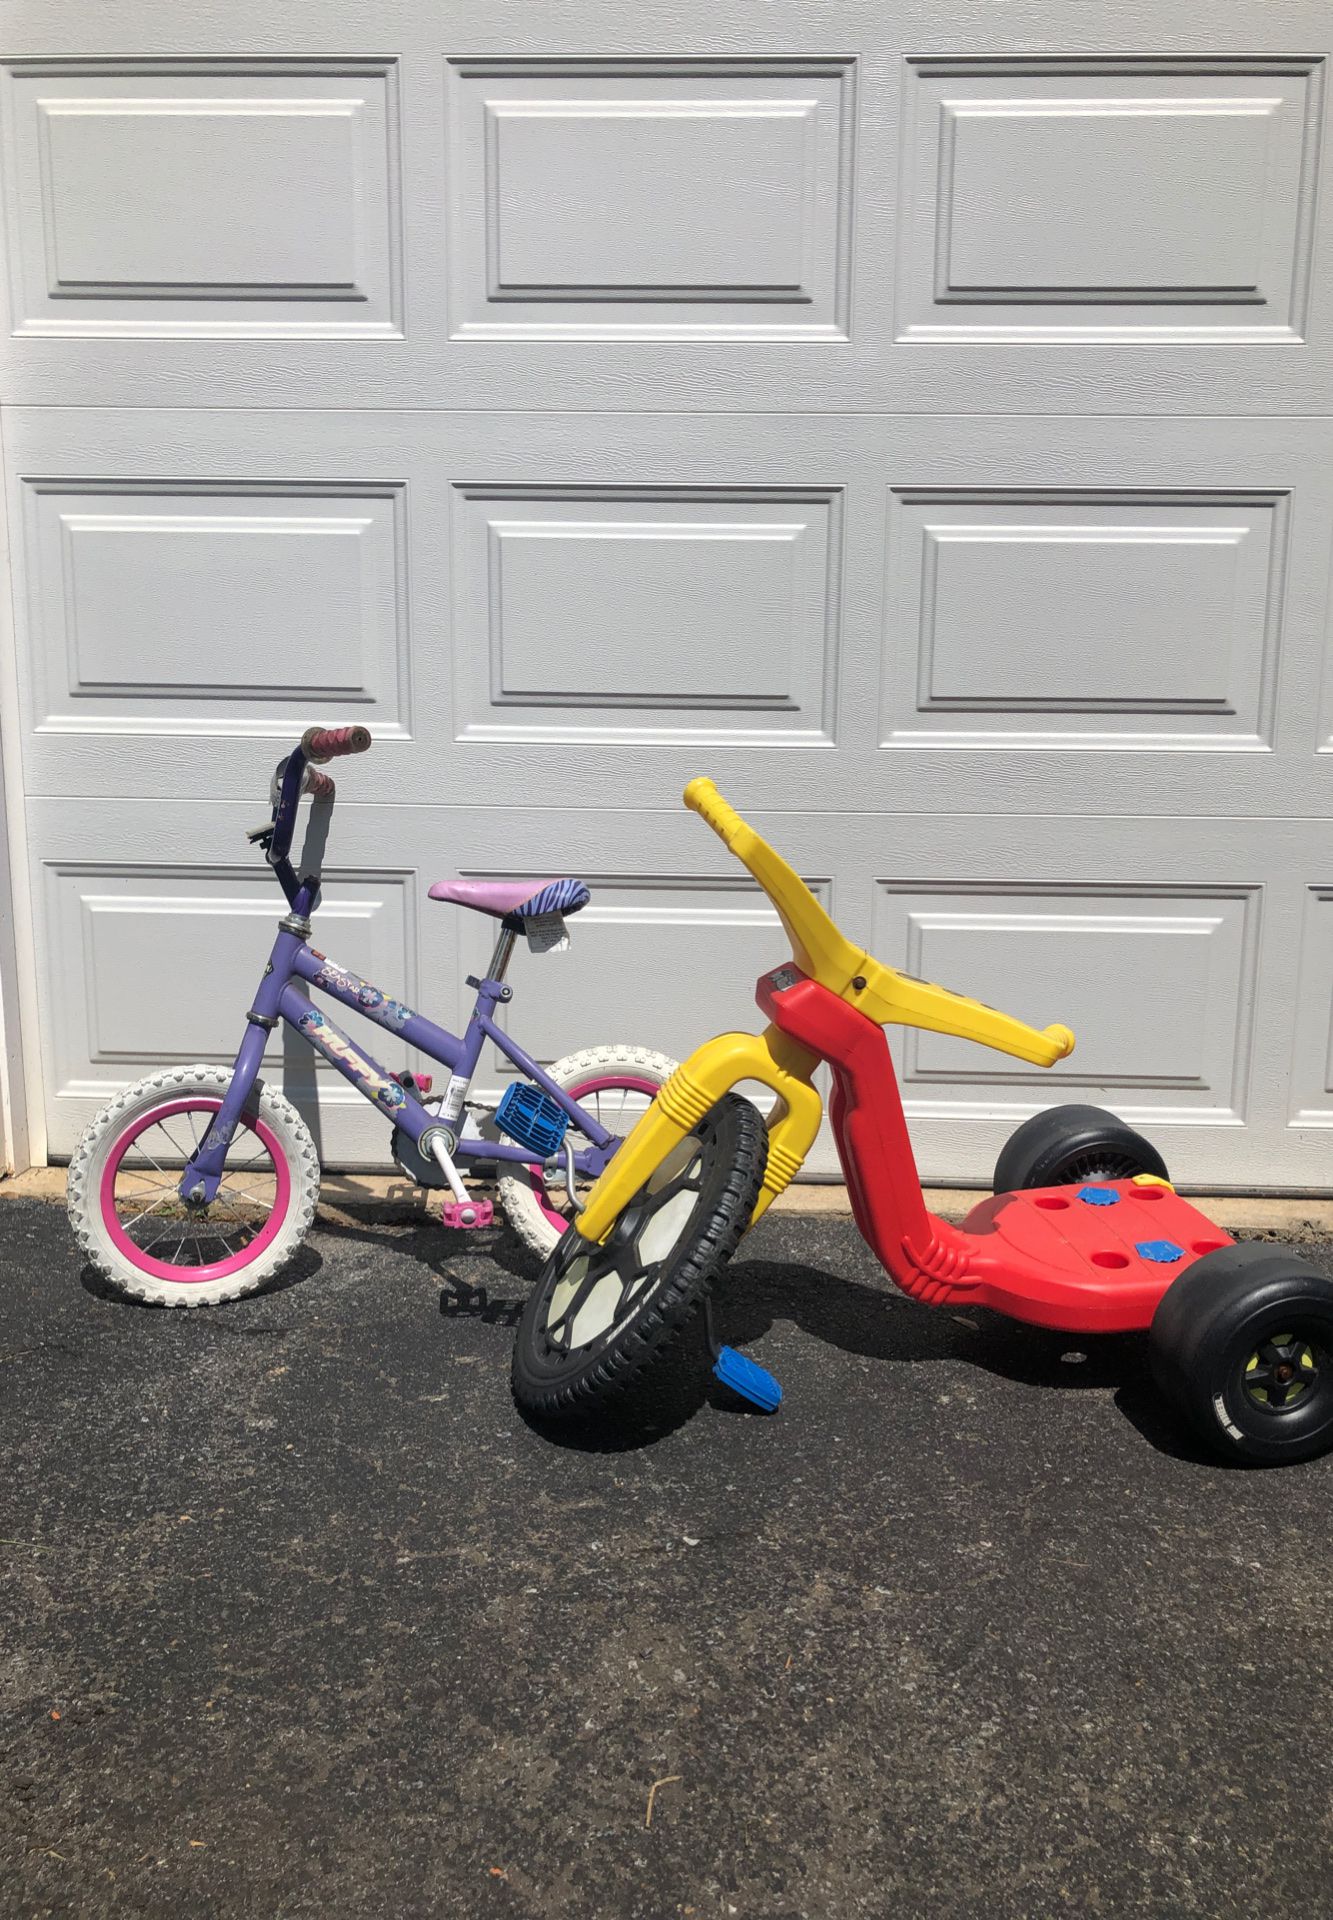 Girls and Boys Bikes. Both in good condition.